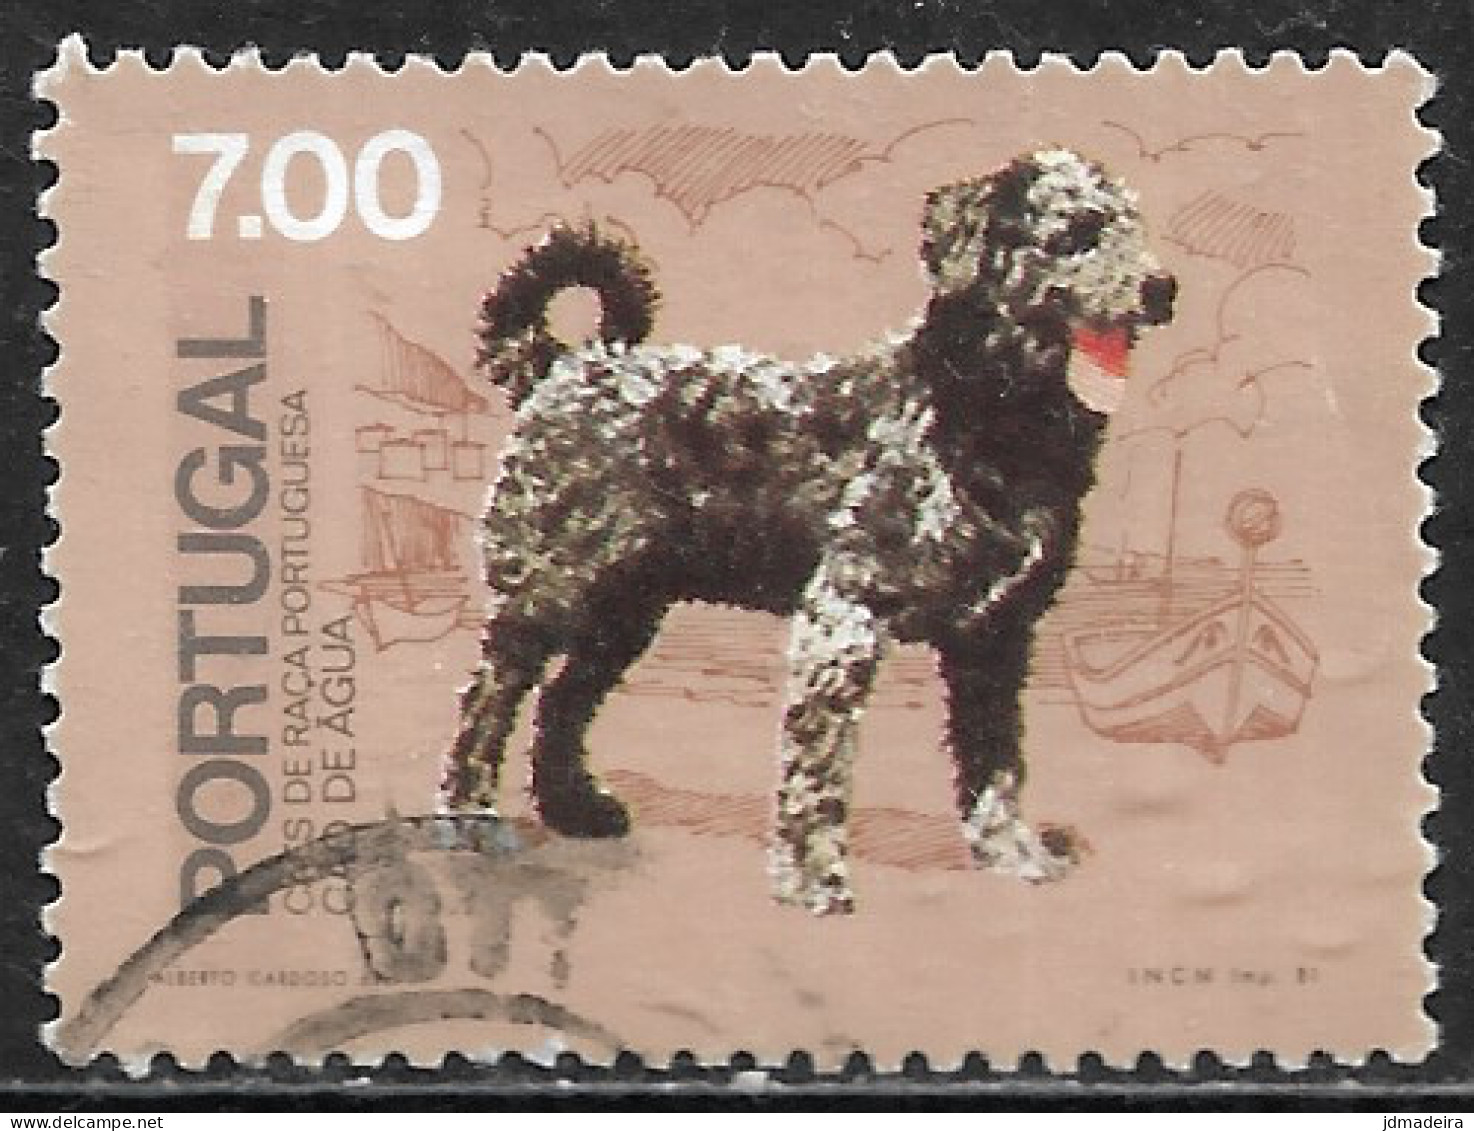 Portugal – 1981 Portuguese Breed Dogs 7.00 Used Stamp - Used Stamps